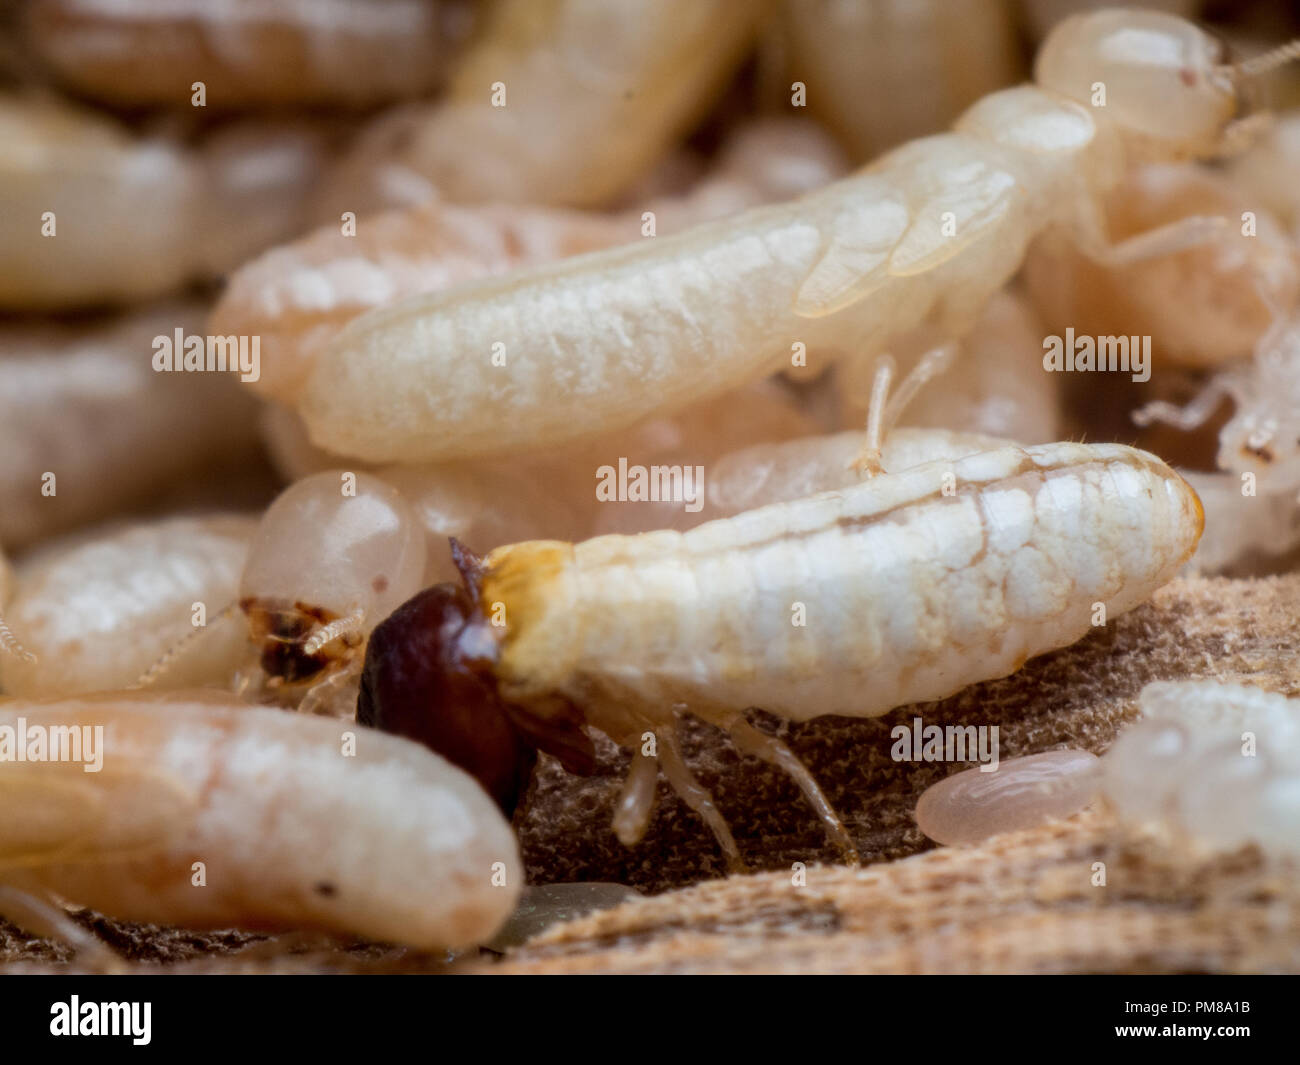 Soldier and workers of termite hive on wood furniture Stock Photo